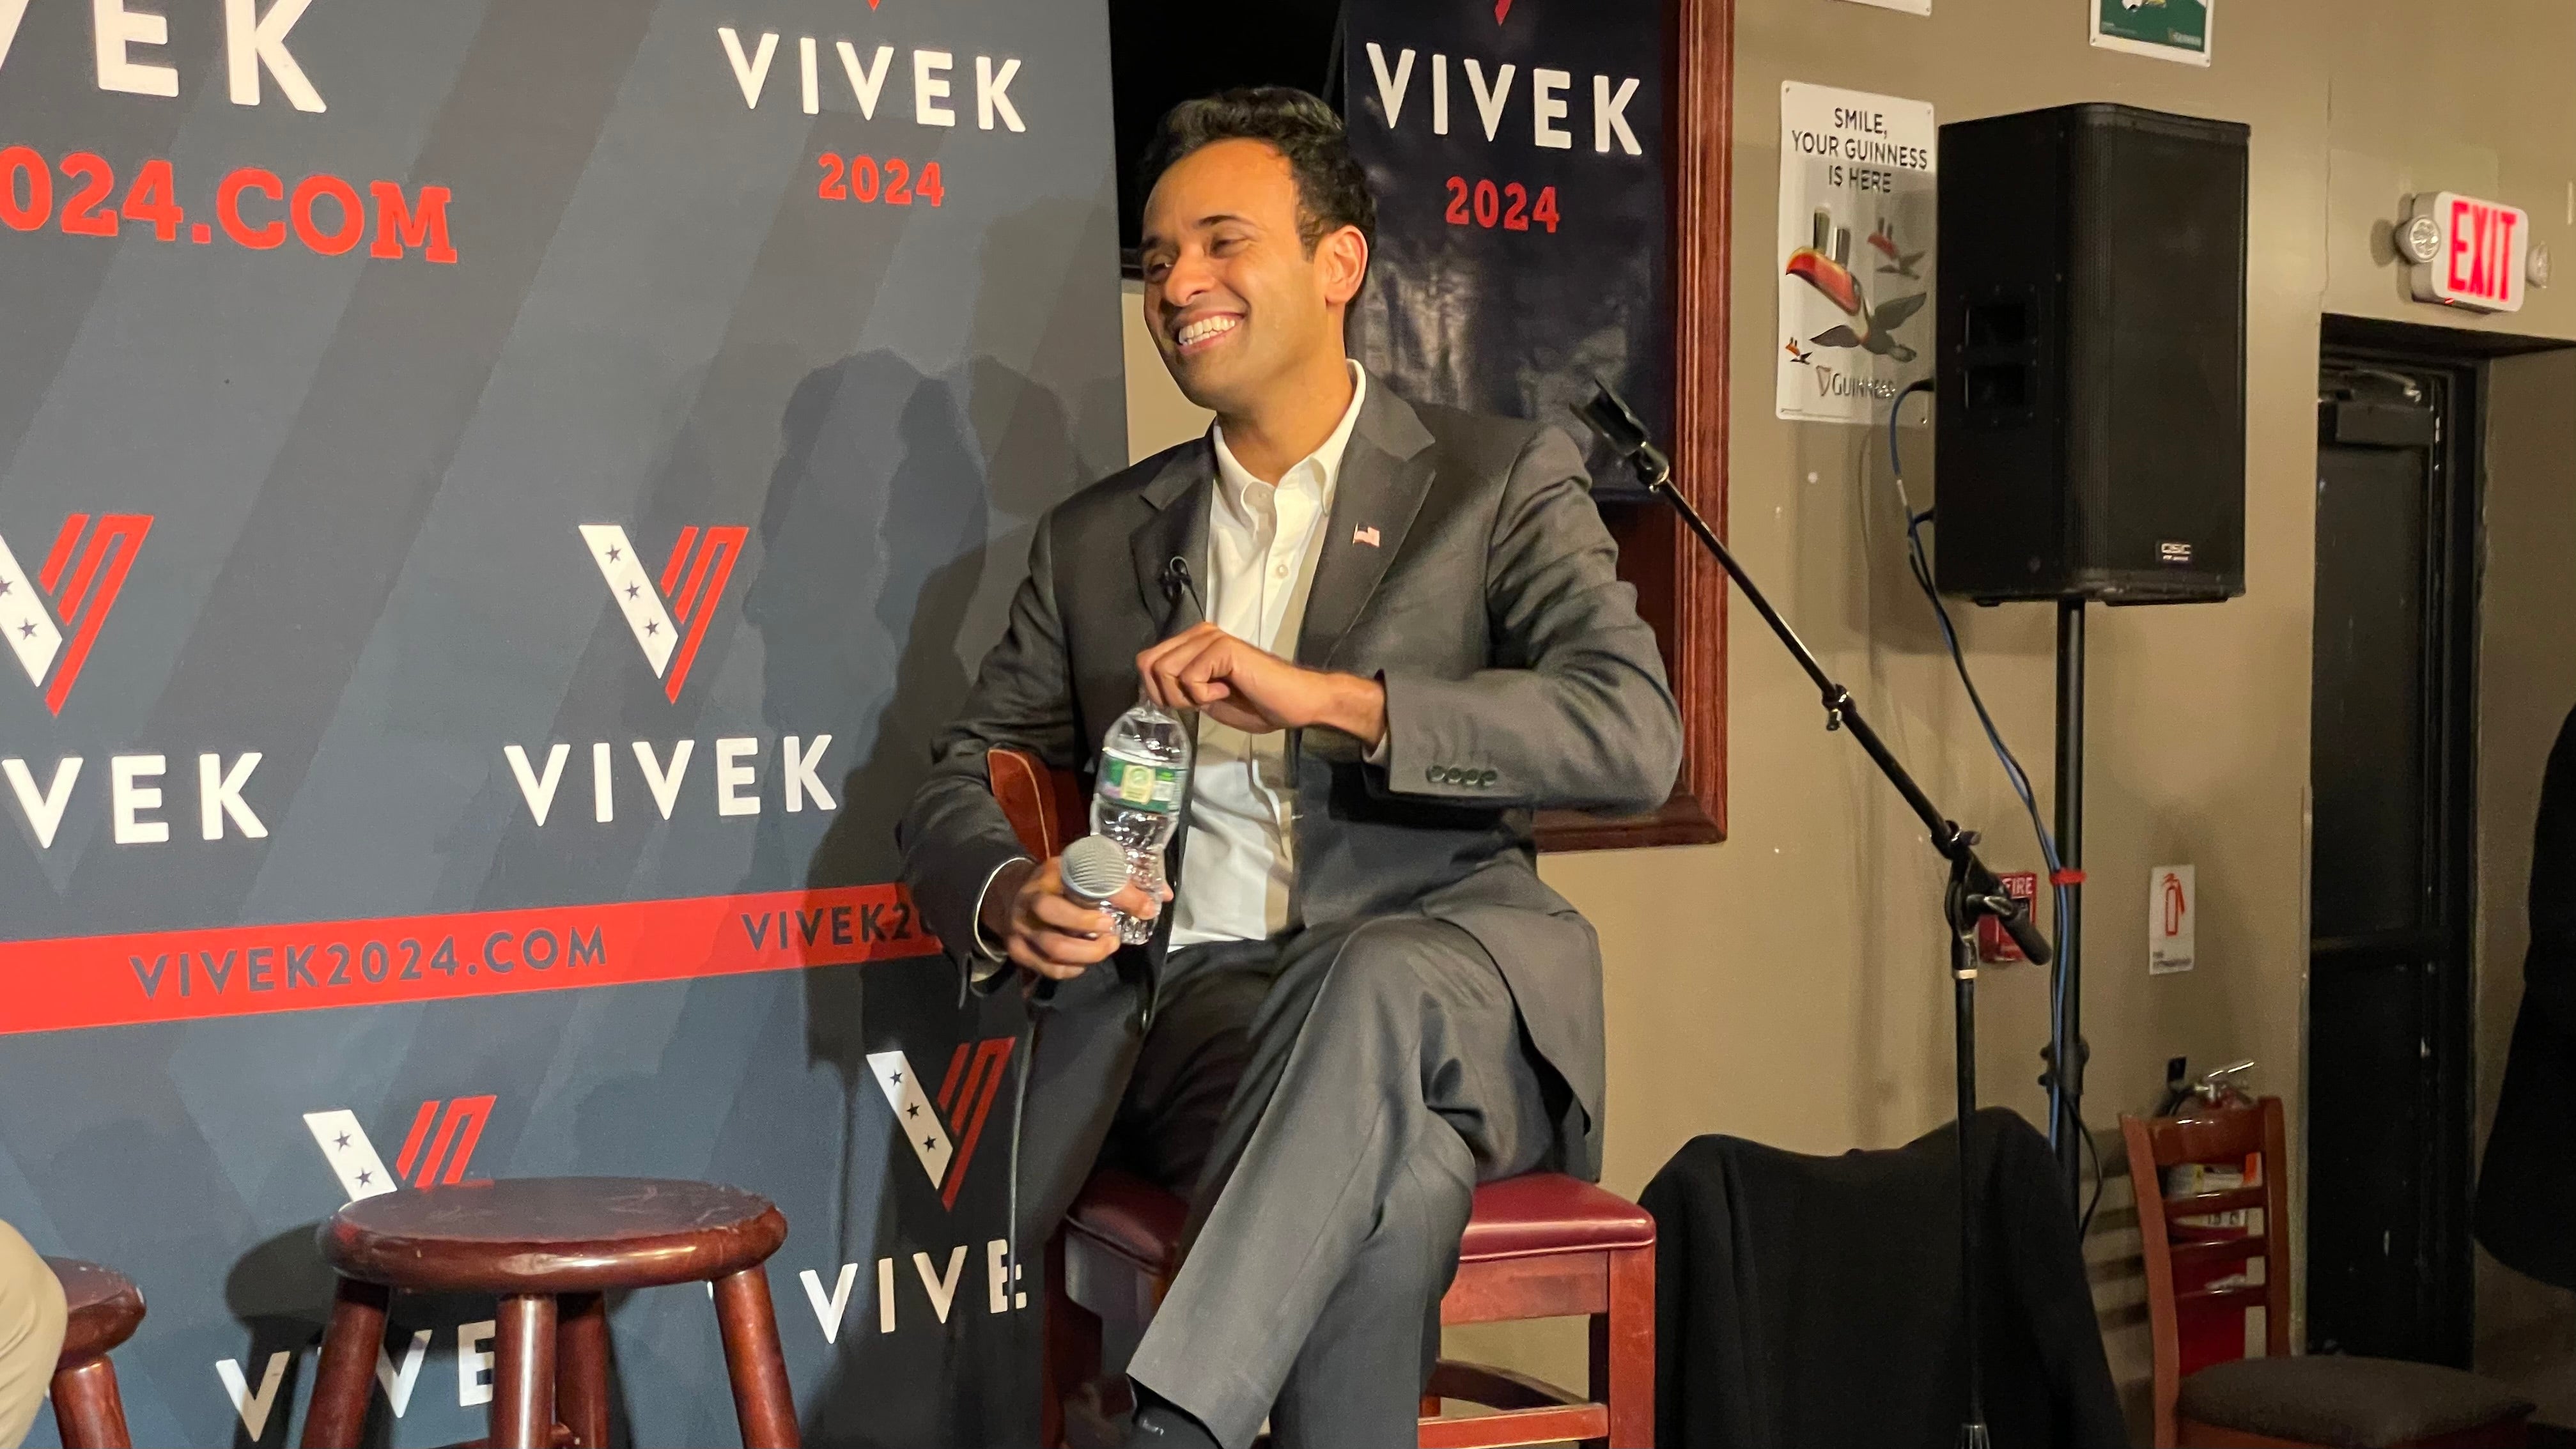 Vivek Ramaswamy says he’d ‘be surprised’ if Trump targets him in 2024 race